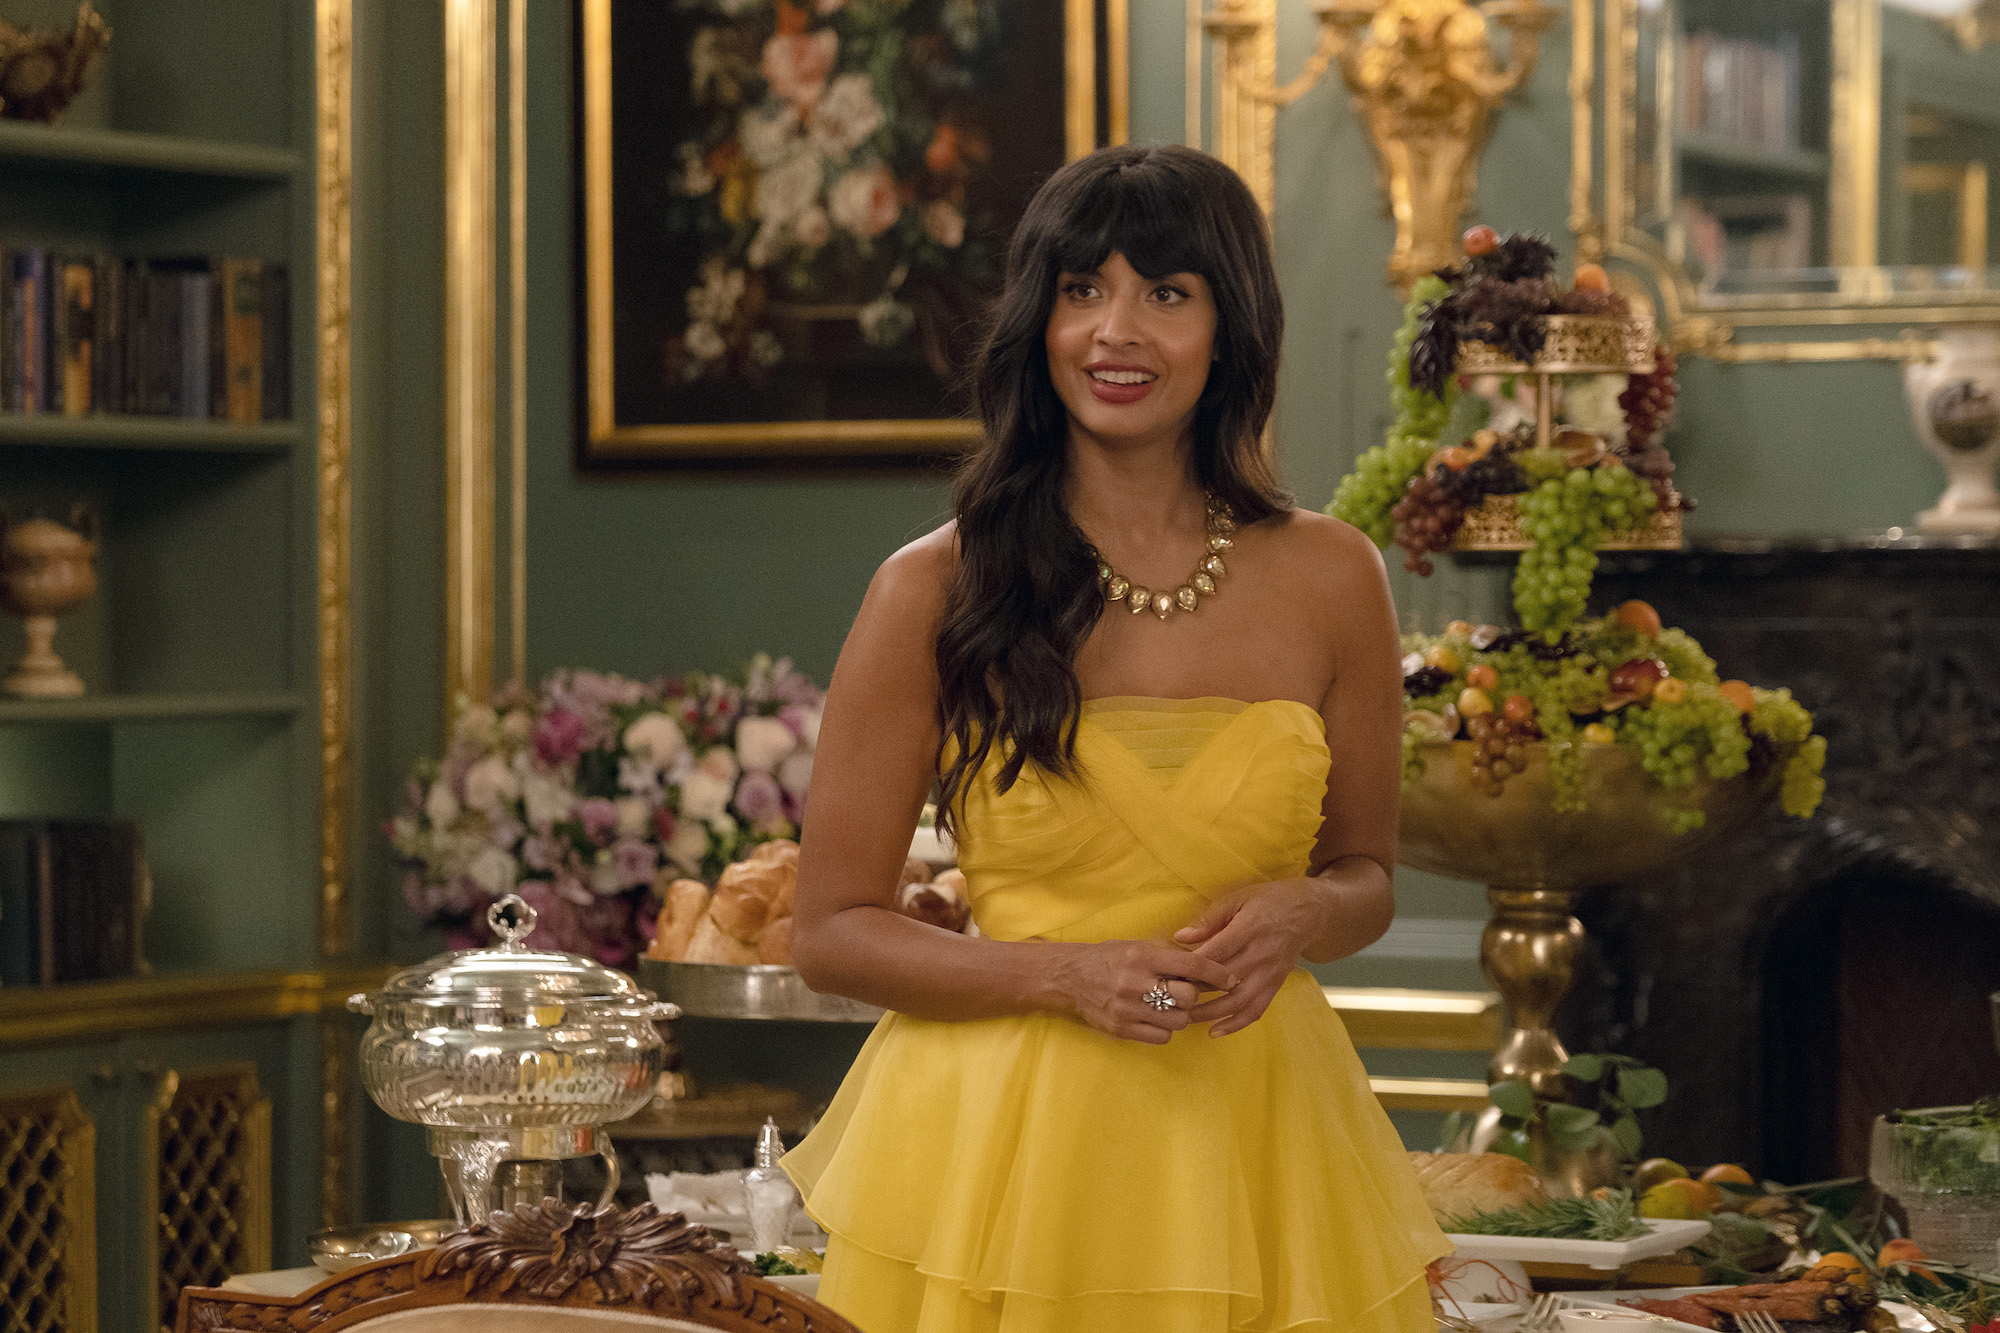 ‘The Good Place’: Jameela Jamil ‘Couldn’t Stand’ Her Character Tahani